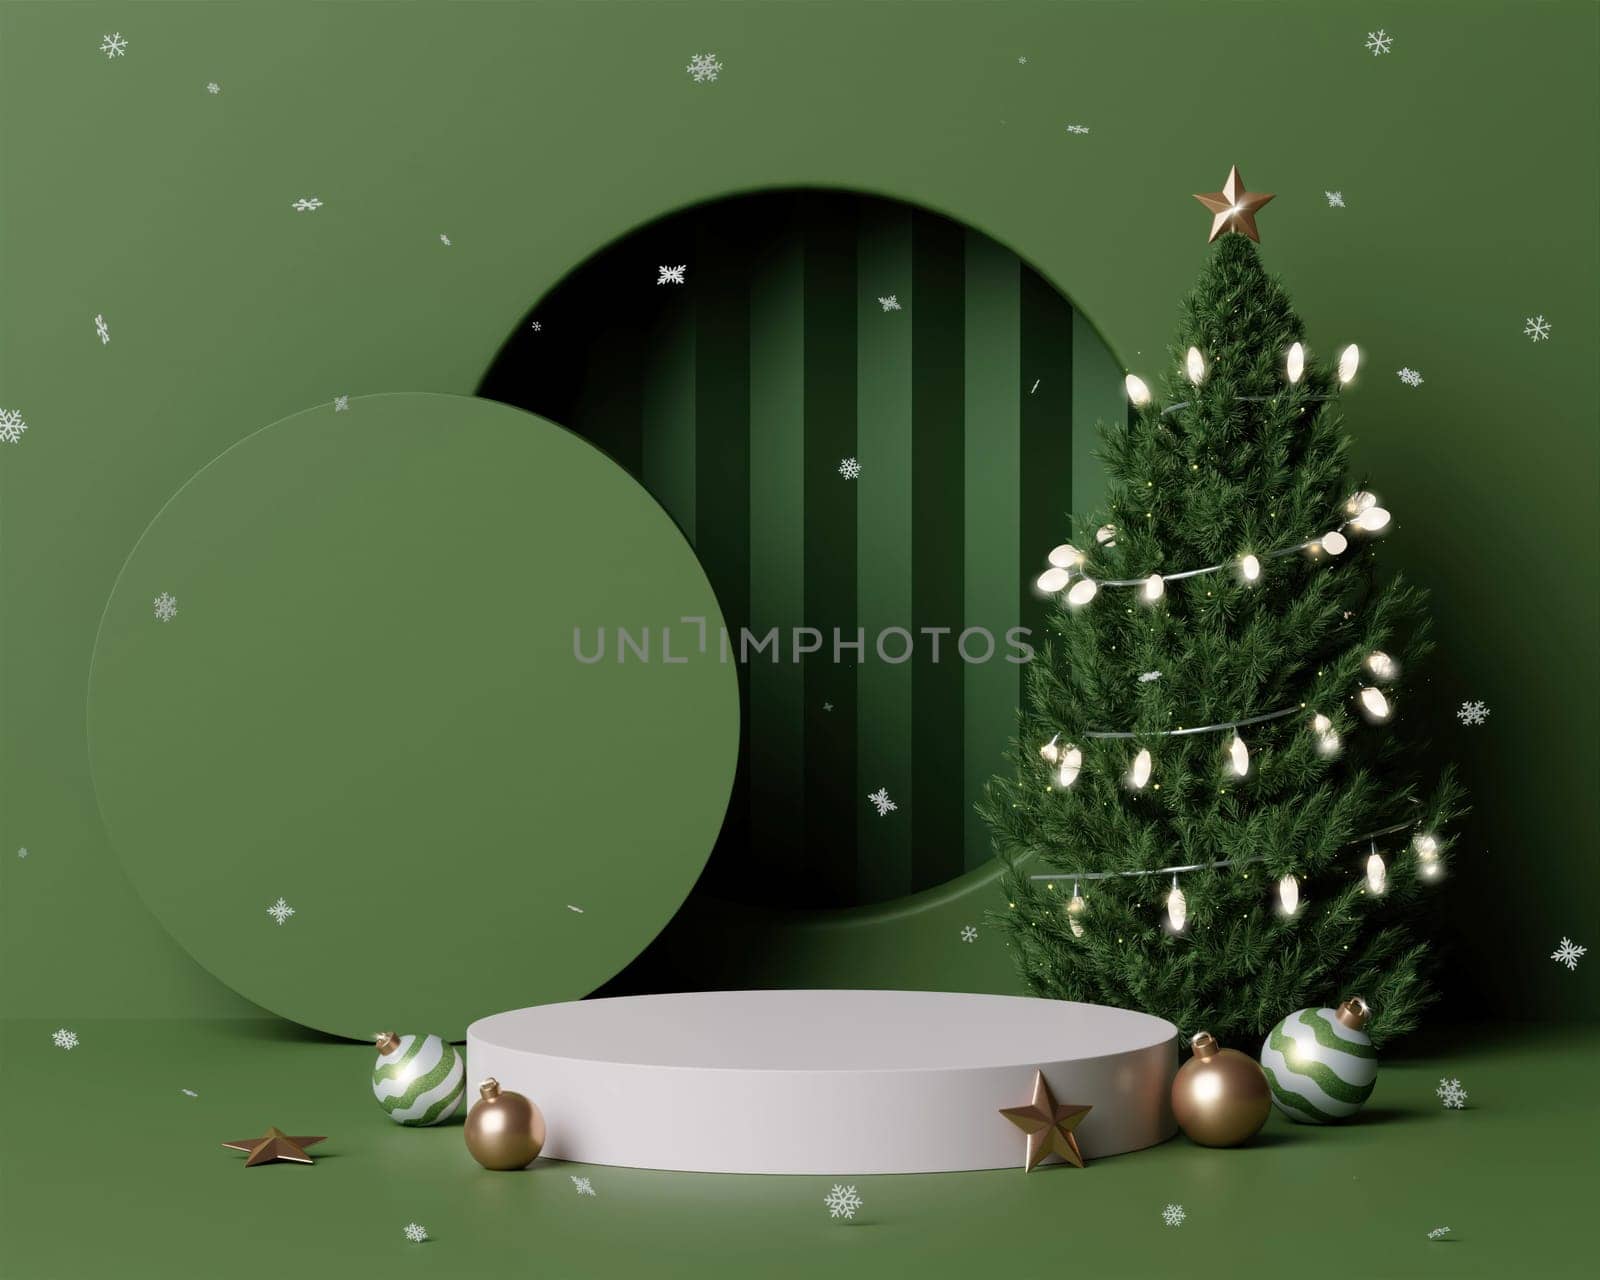 3d Christmas tree podium. Realistic 3d design stage podium. Decorative festive elements glass bauble balls. Xmas holiday template podium. by meepiangraphic